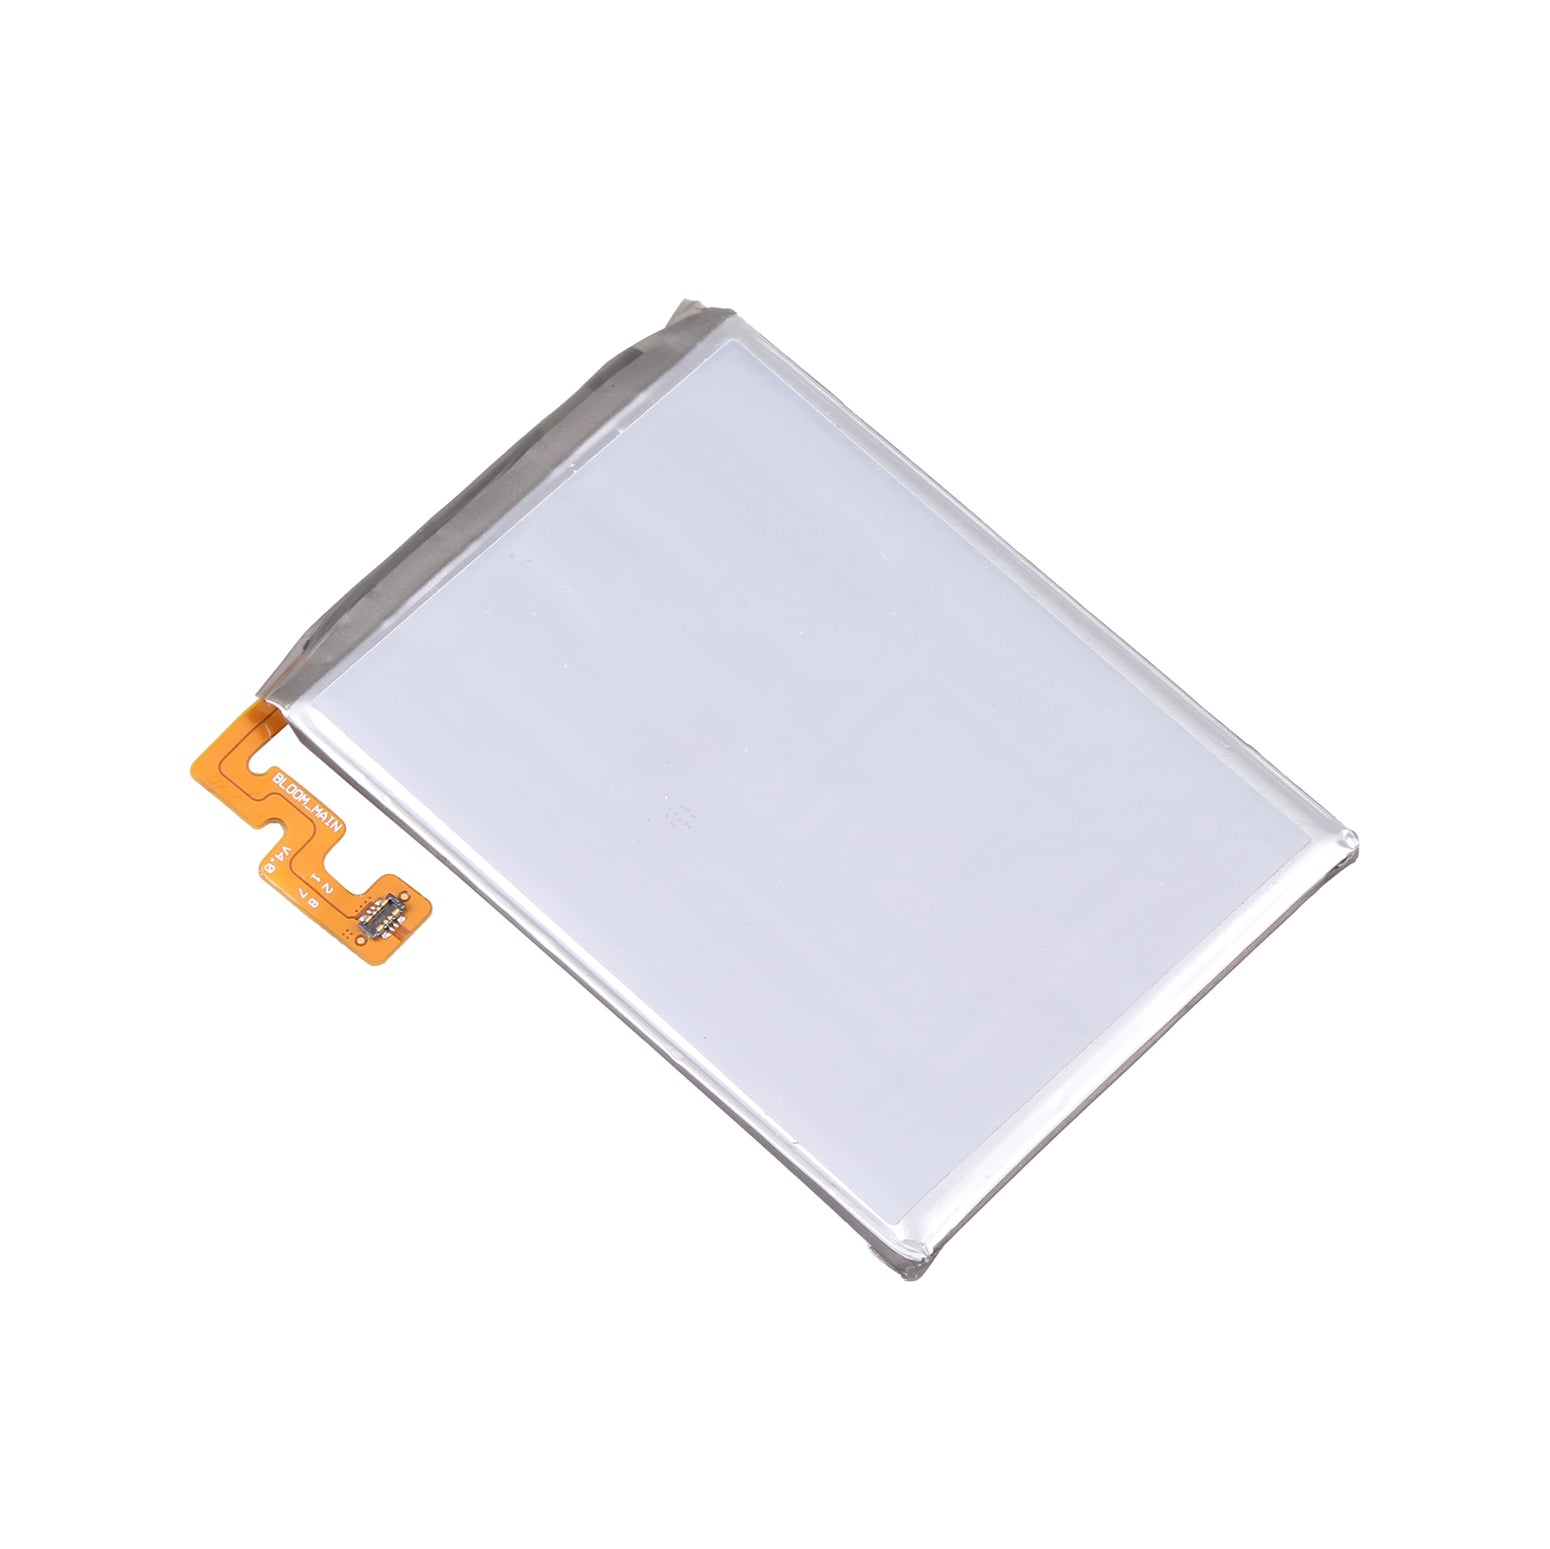 Replacement Battery For Samsung Galaxy Z Flip EB-BF700ABY - Main Version